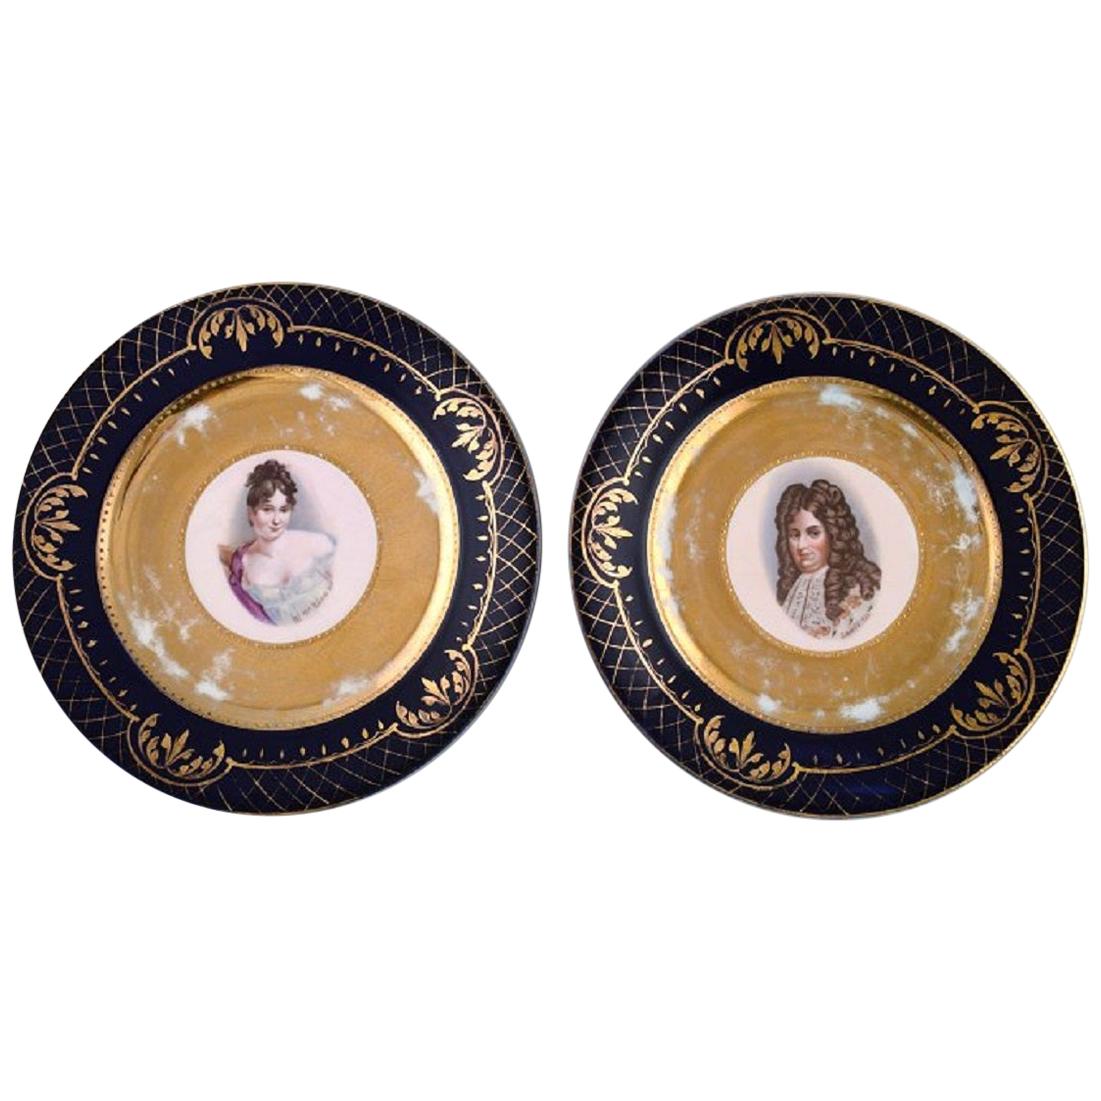 Two Decorative Plates in Hand Painted Porcelain with Gold Decoration, circa 1900 For Sale